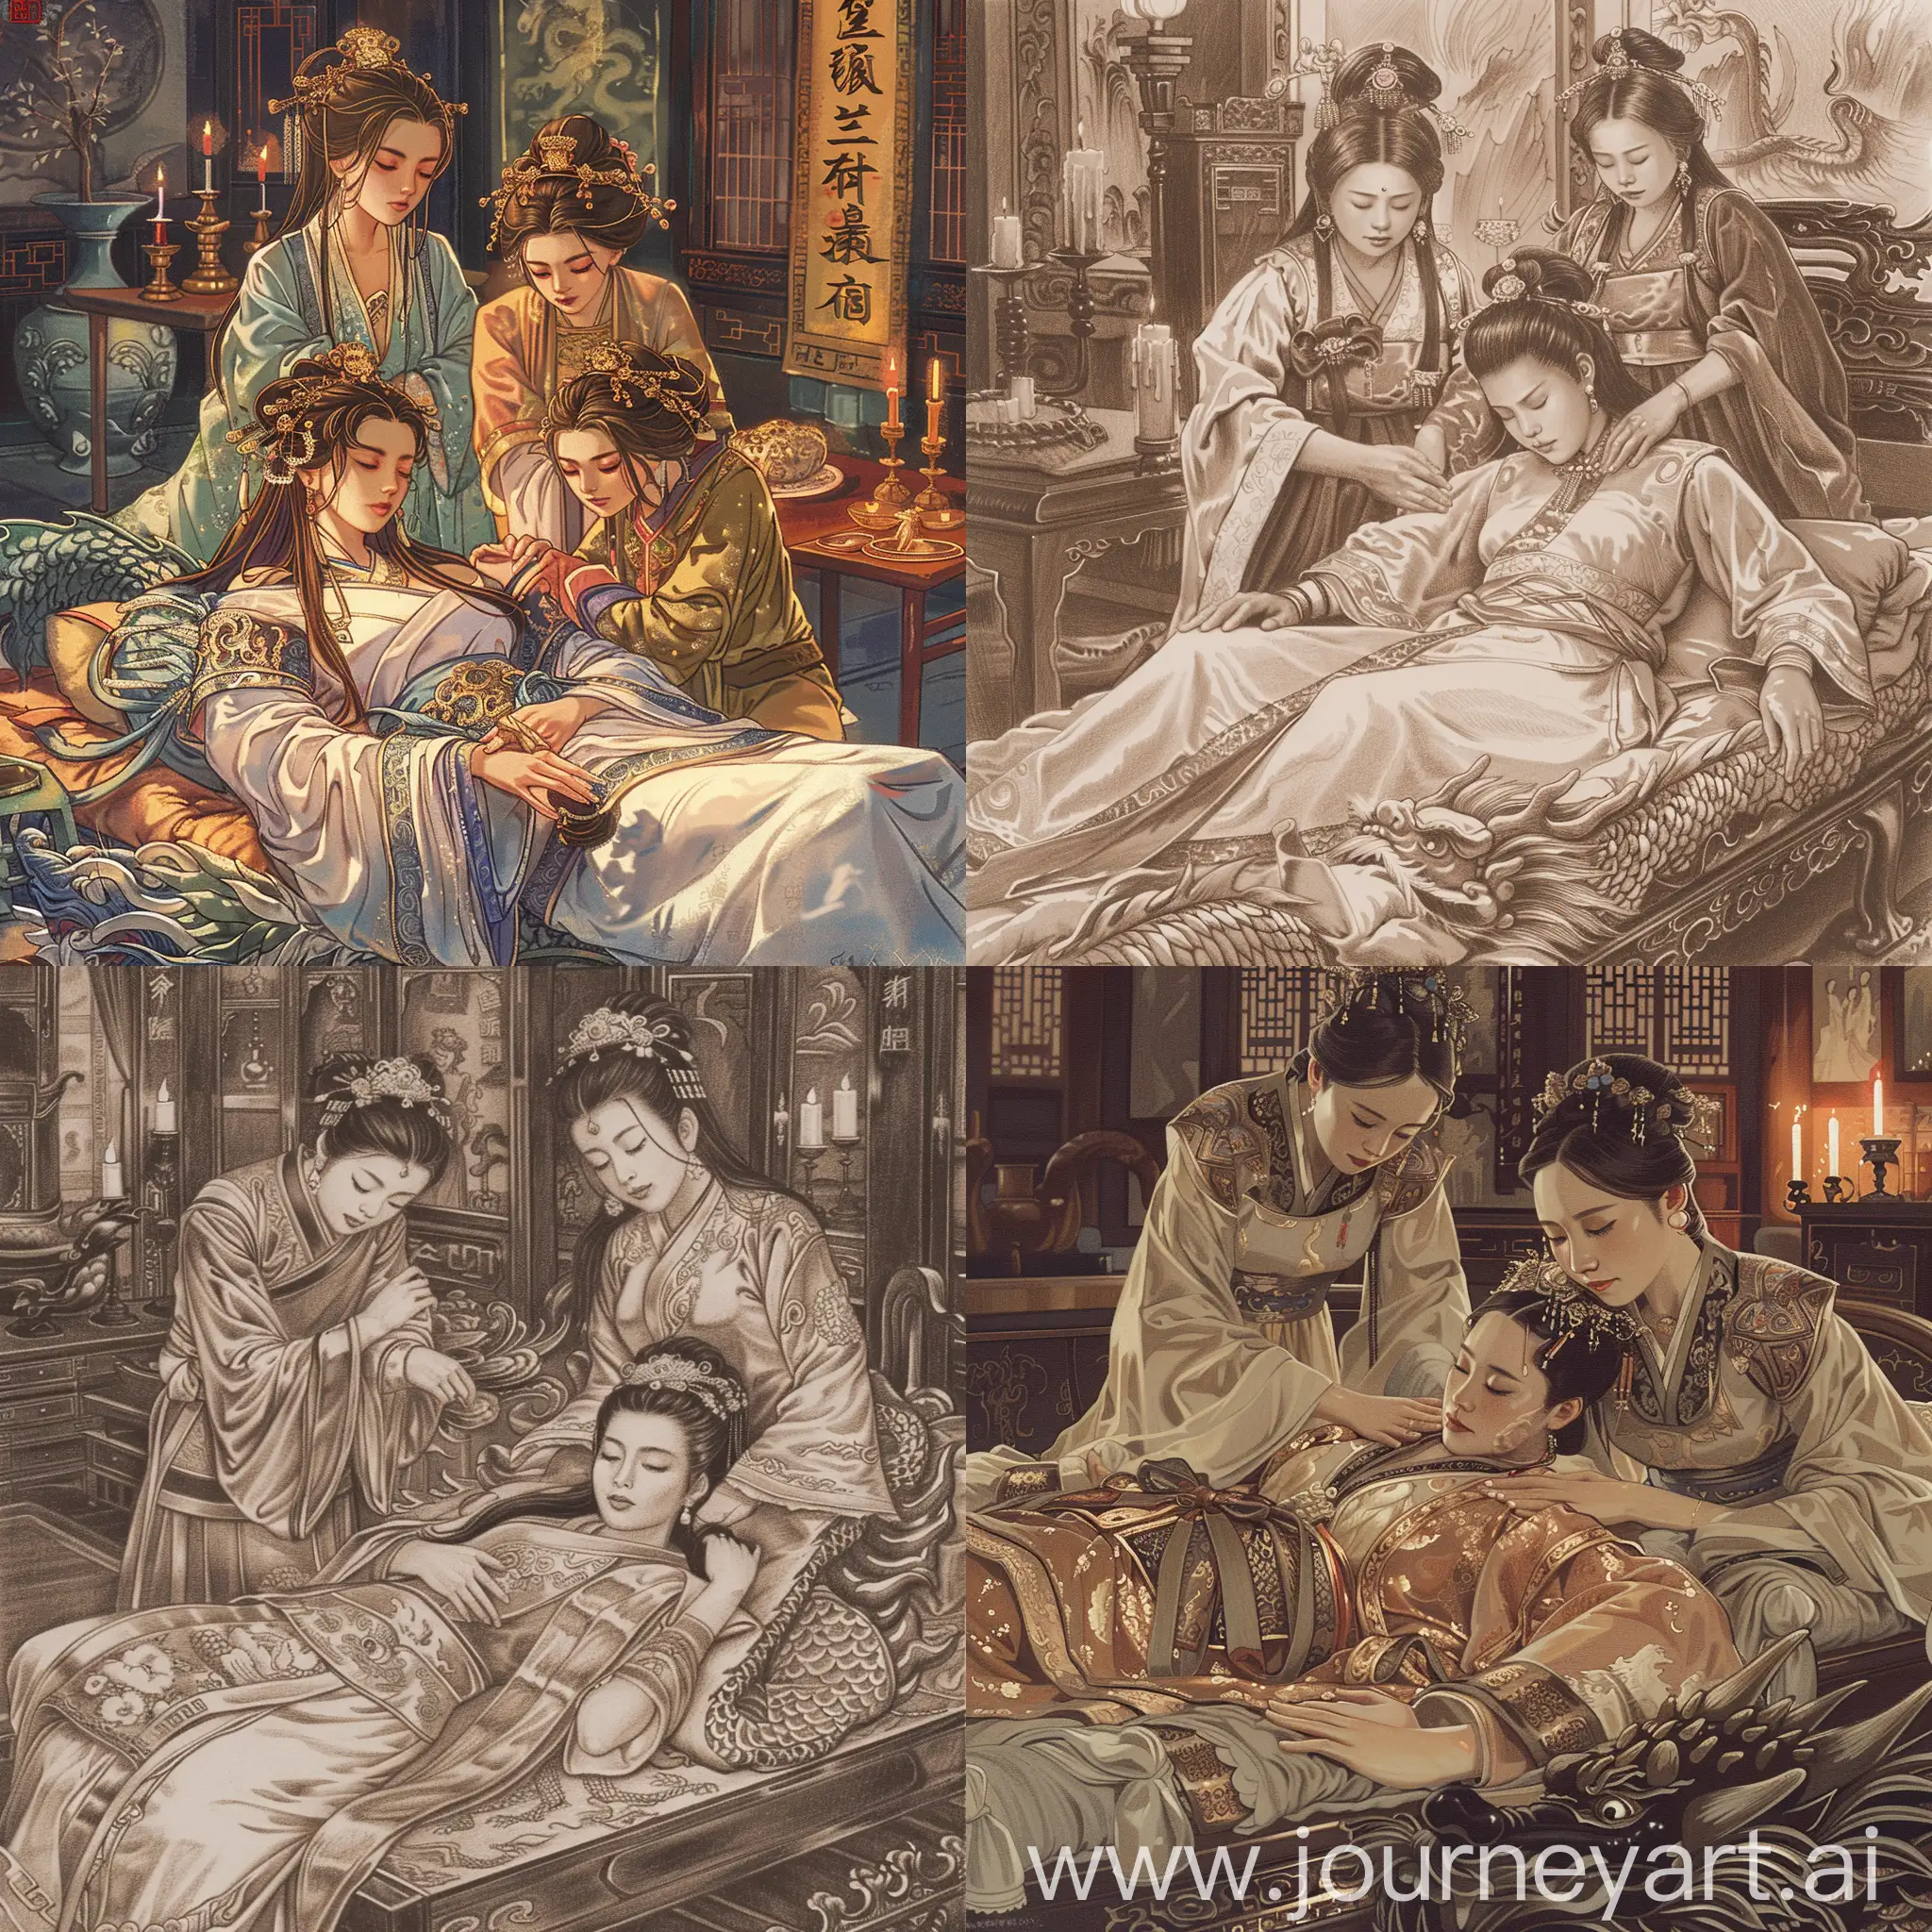 Chinese-Empress-Resting-Luxurious-Scene-with-Attendants-and-Candlelight